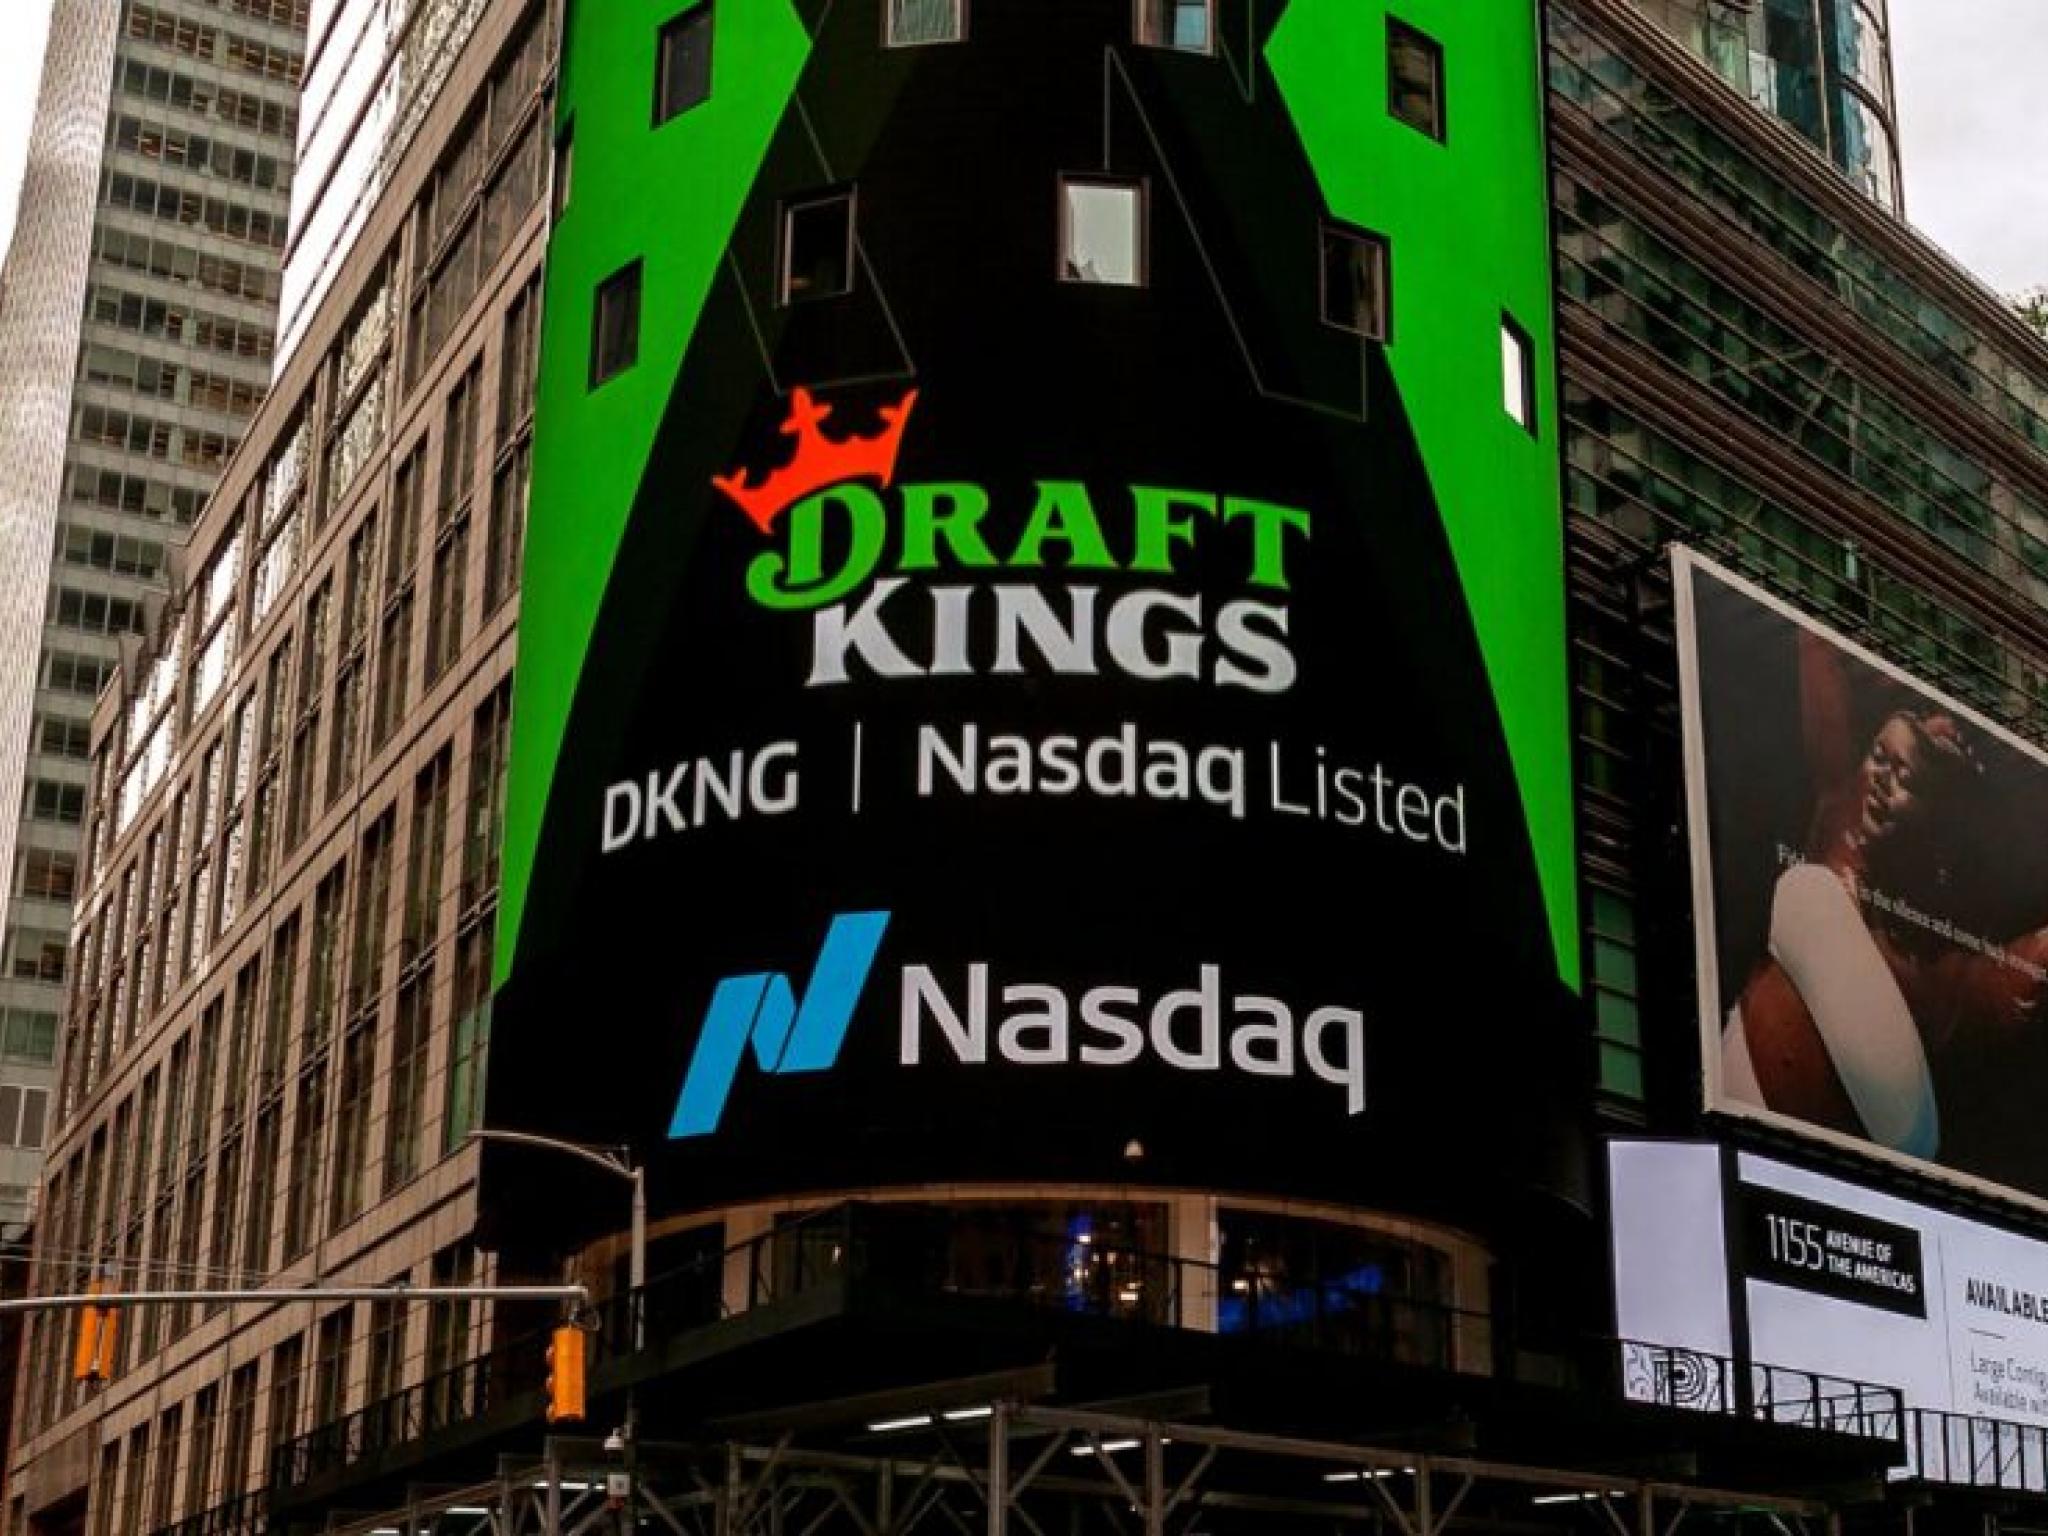  draftkings-emerging-as-a-leader-in-35b-north-american-online-betting-market-analyst-says 